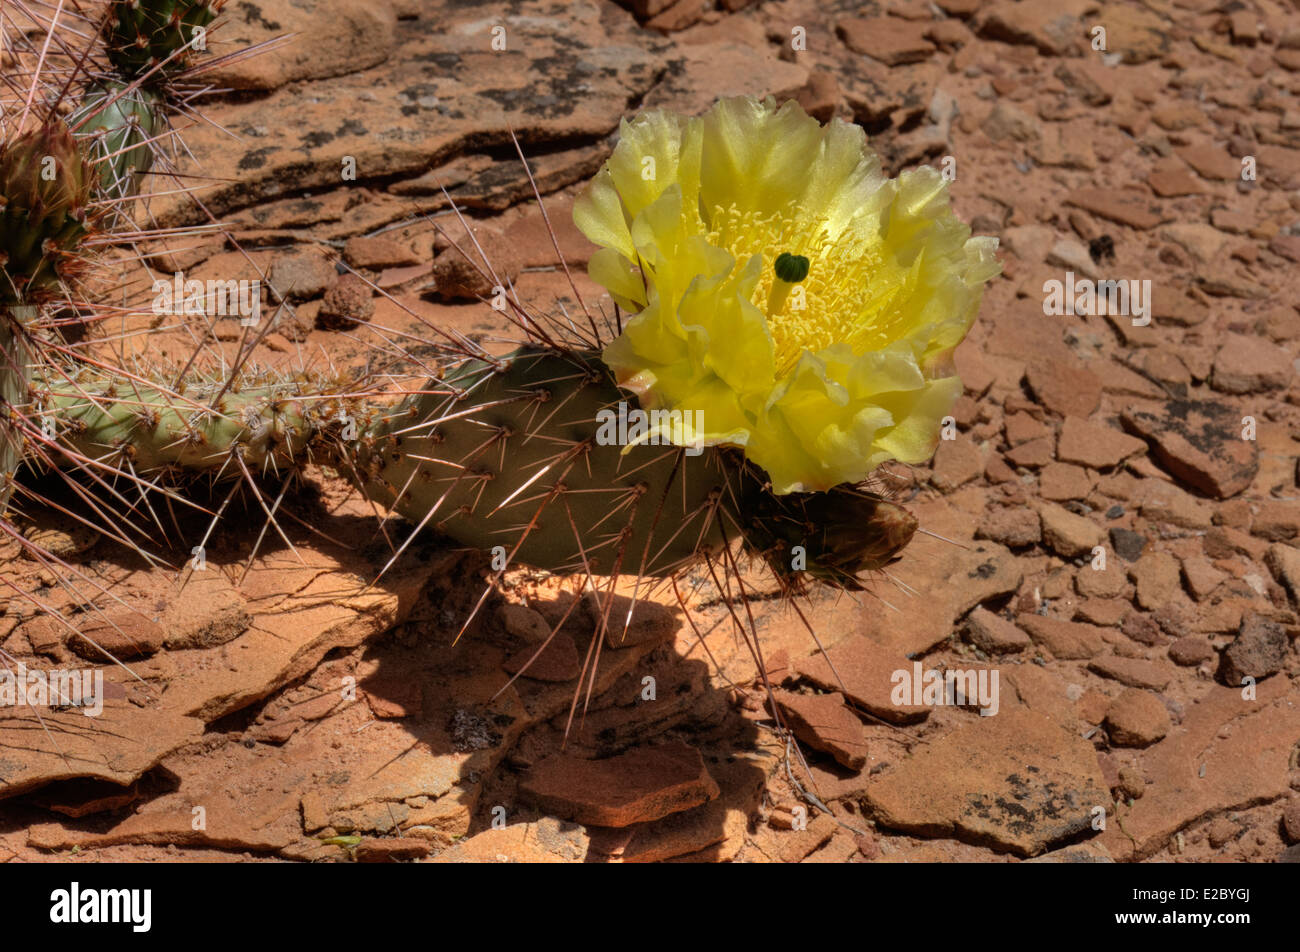 Prickly Pear cactus in bloom Stock Photo